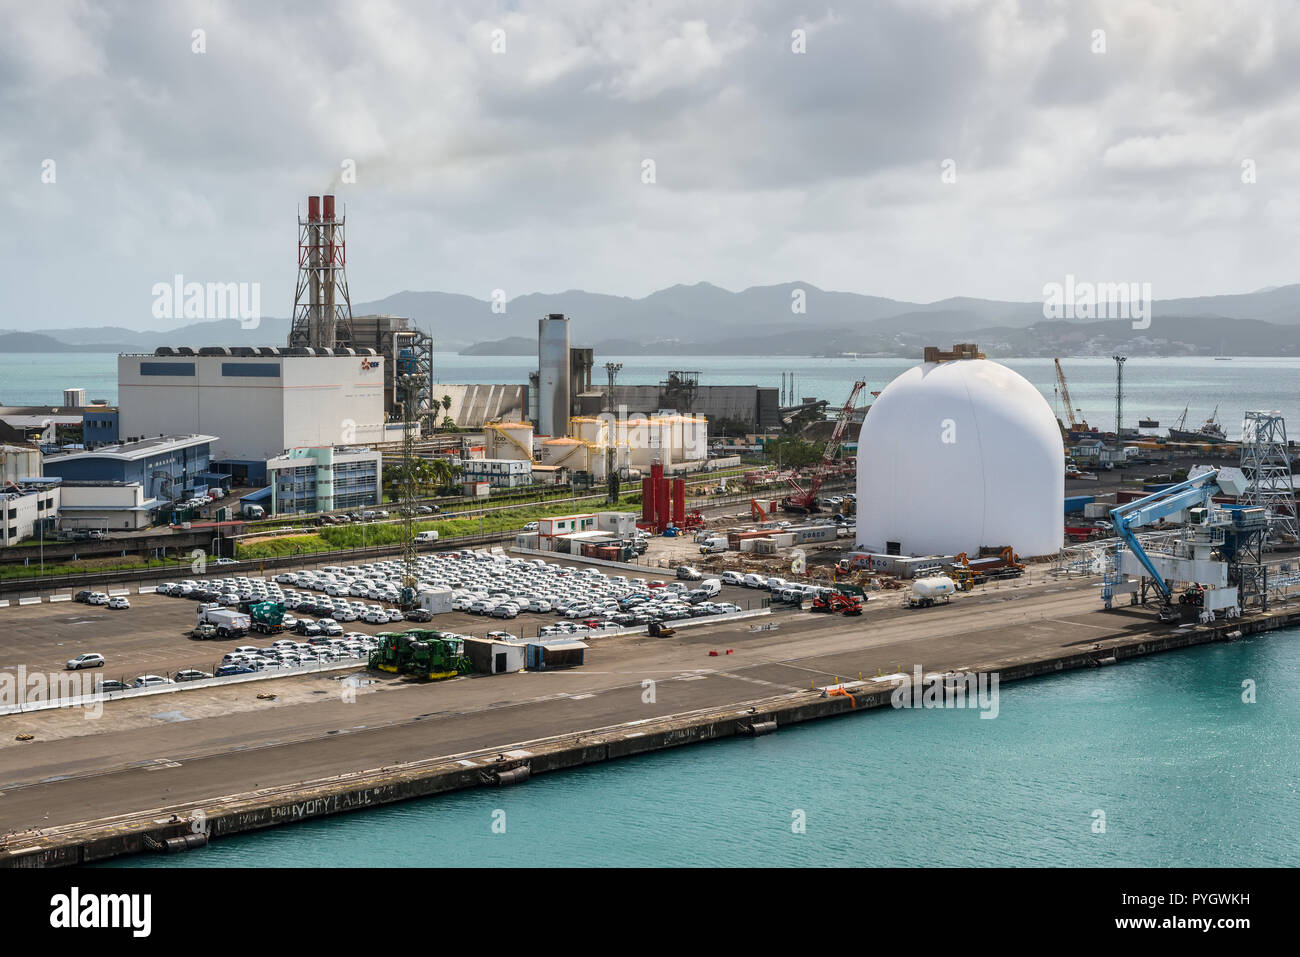 Fort-de-France, Martinique - December 19, 2016: Power plant (EDF - Electricite de France) and port infrastructure in Fort de France, the capital of Ma Stock Photo